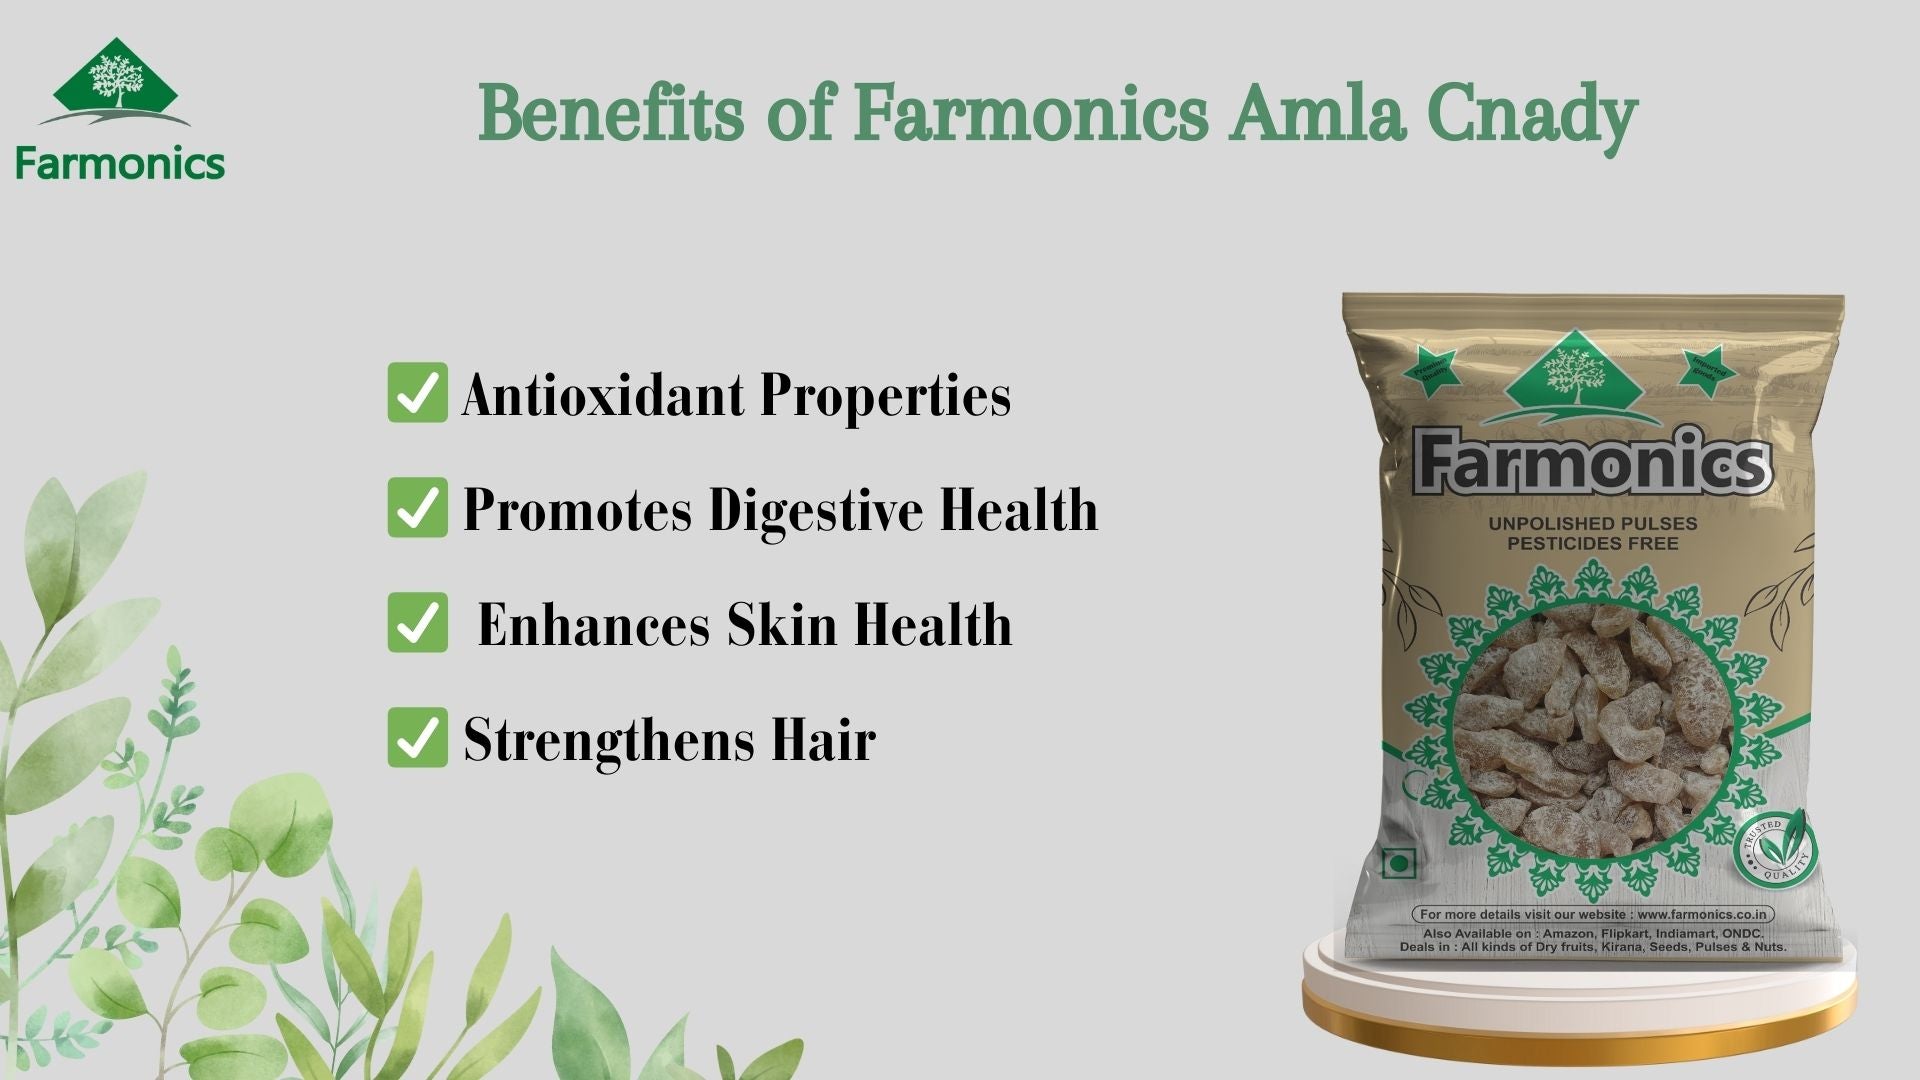 Benefits you can get from Farmonics amla candy 